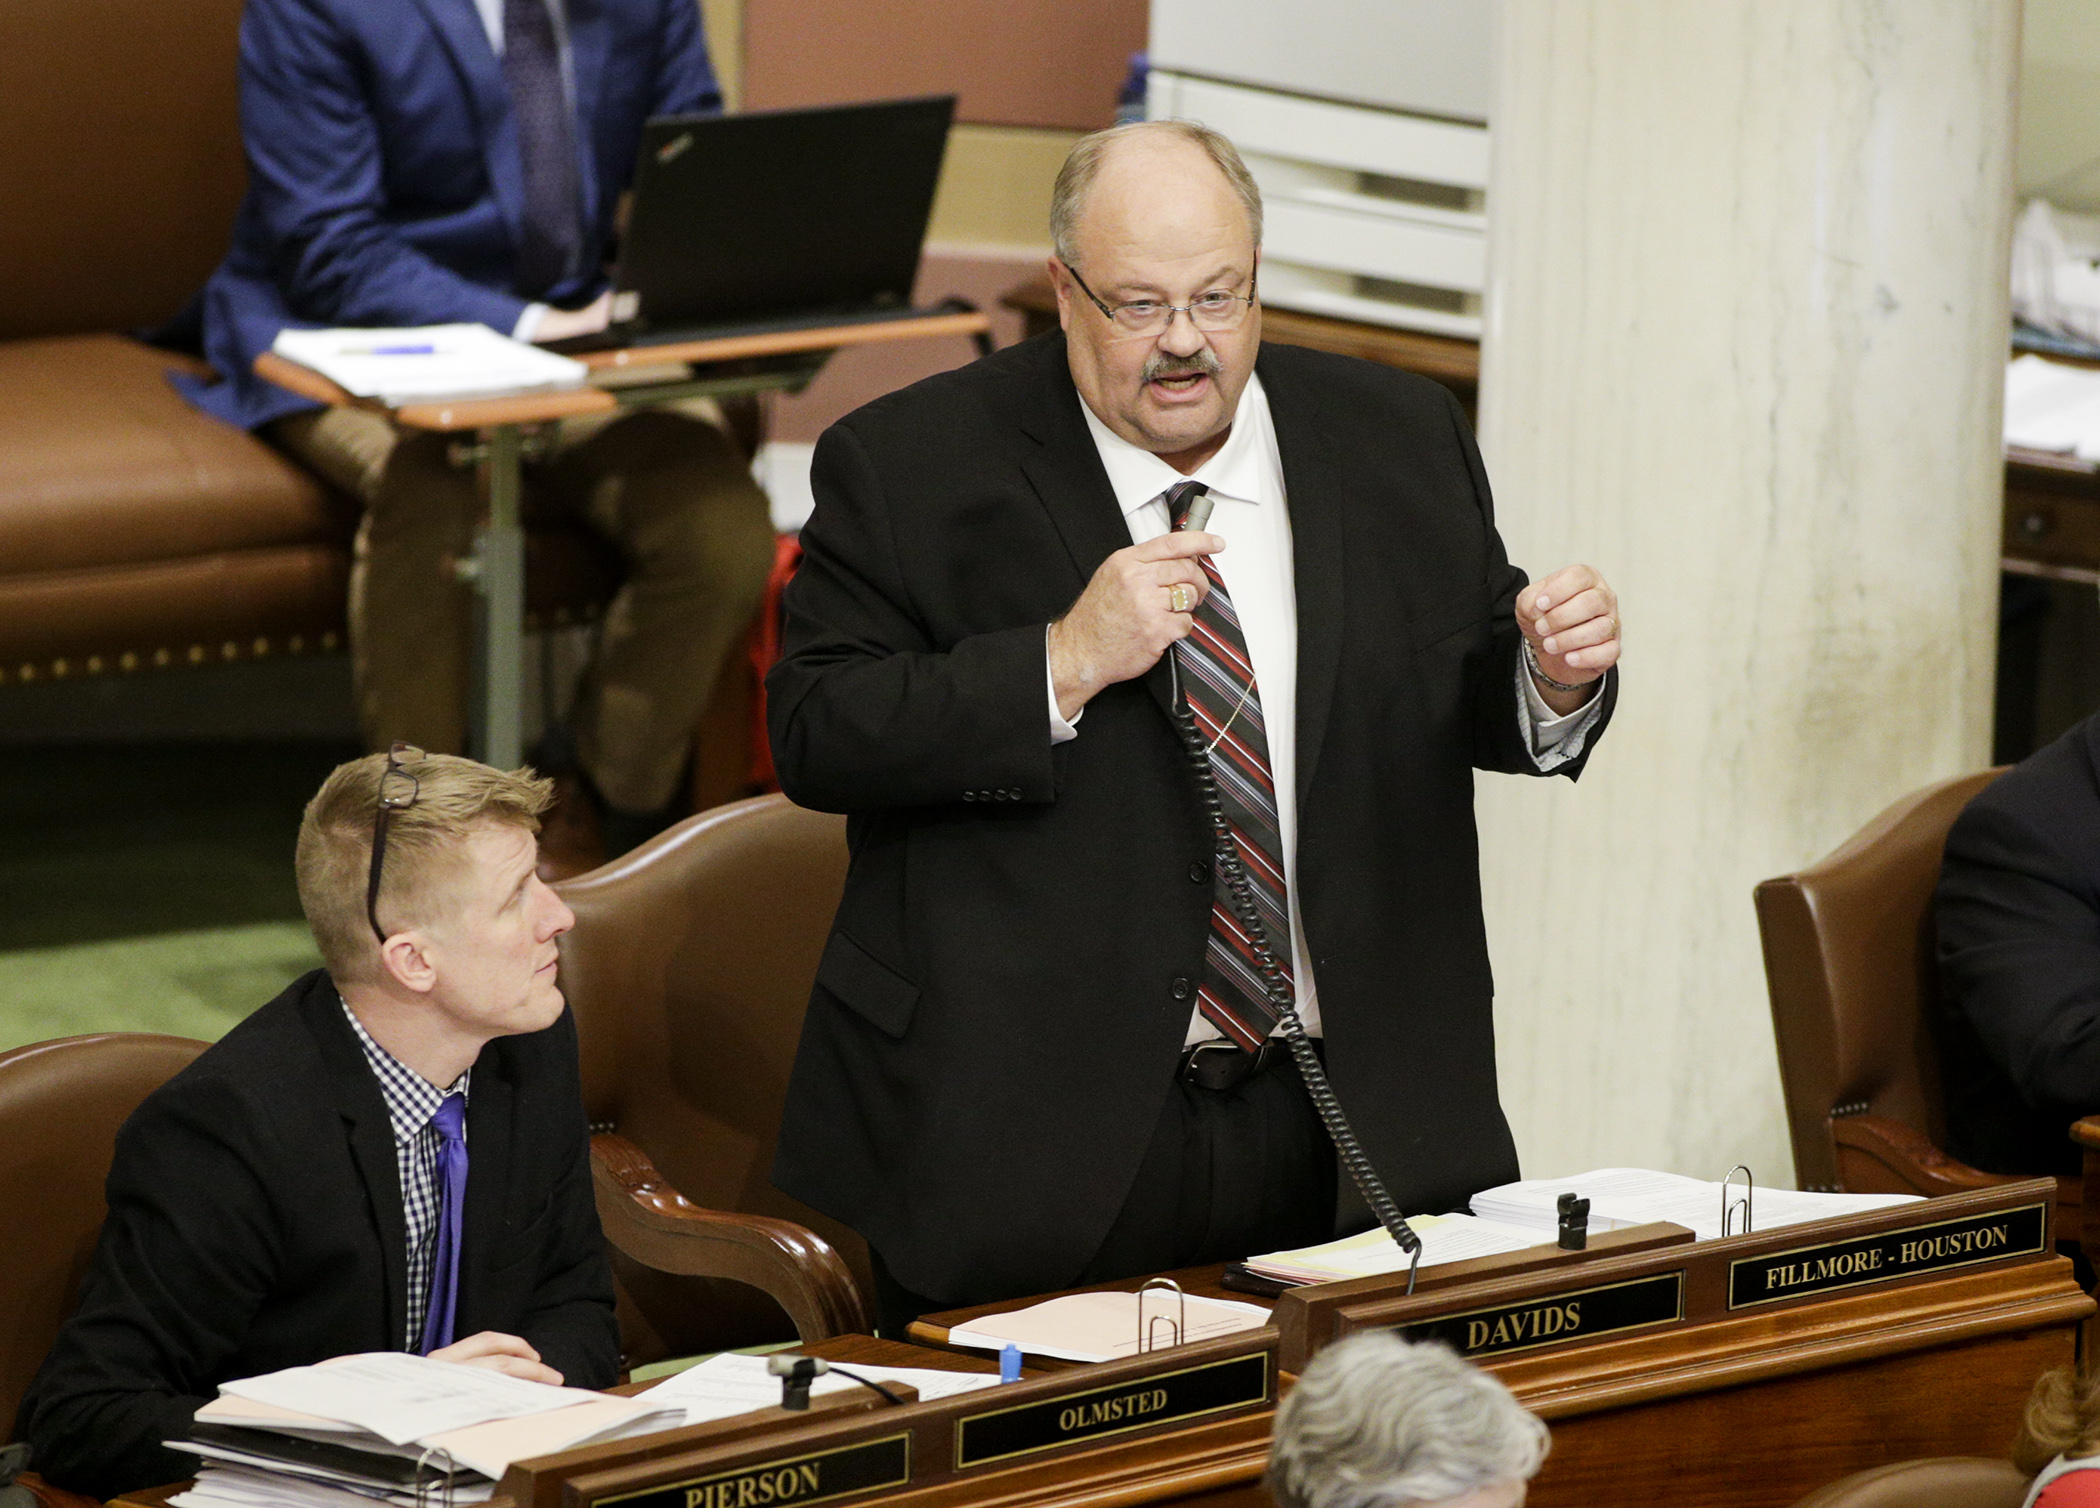 Rep. Greg Davids, chair of the House Taxes Committee, explains provisions of the omnibus tax bill during floor session March 30. Photo by Paul Battaglia